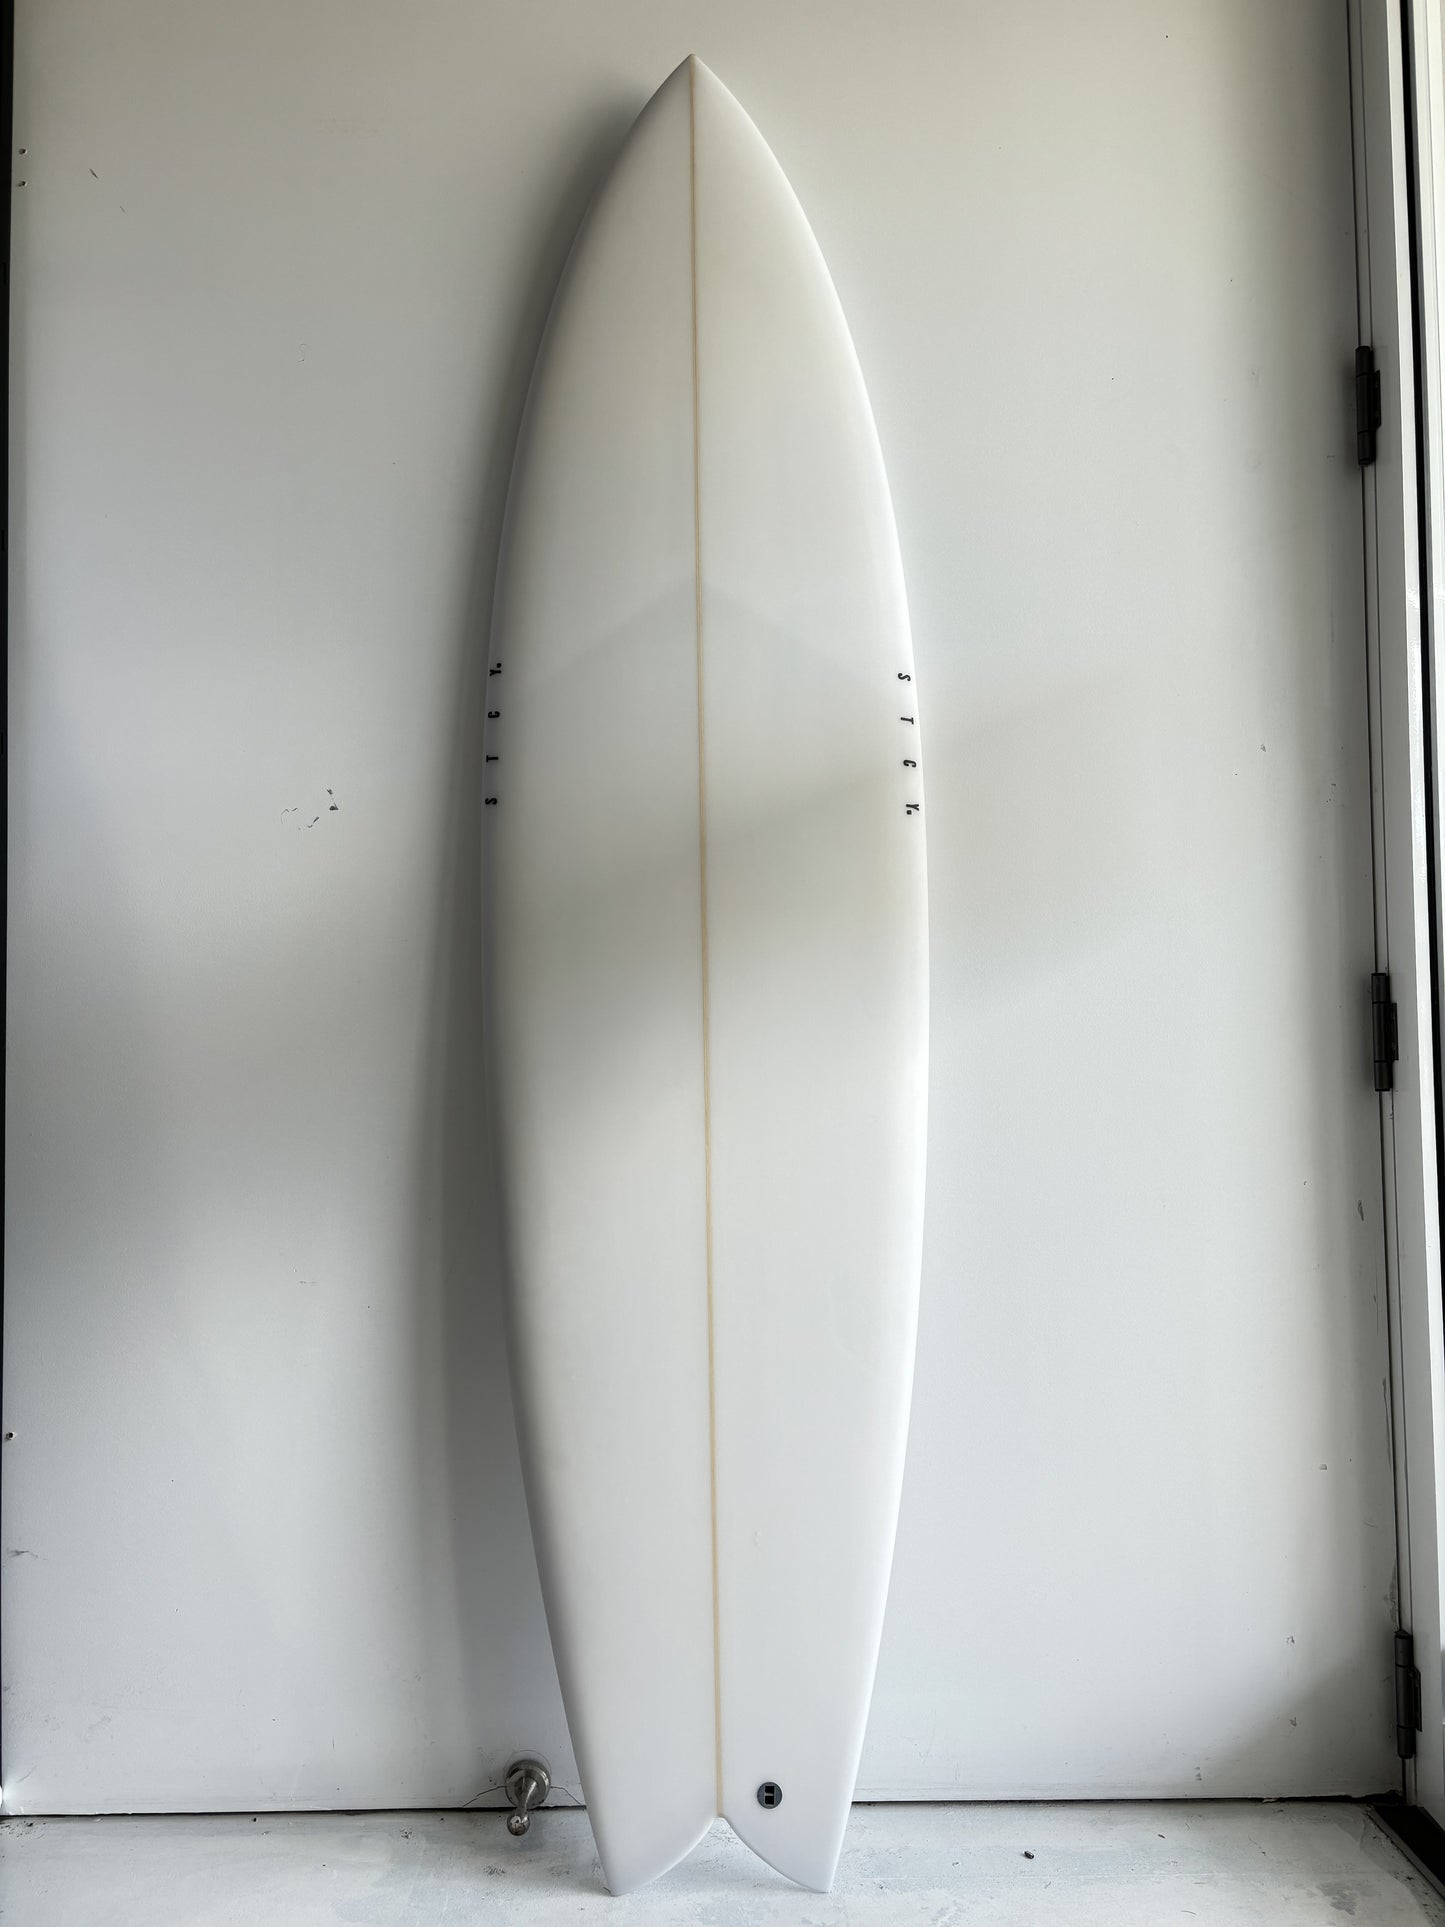 SMOOTH BLEND 6'8 at 41L - Futures (688971)